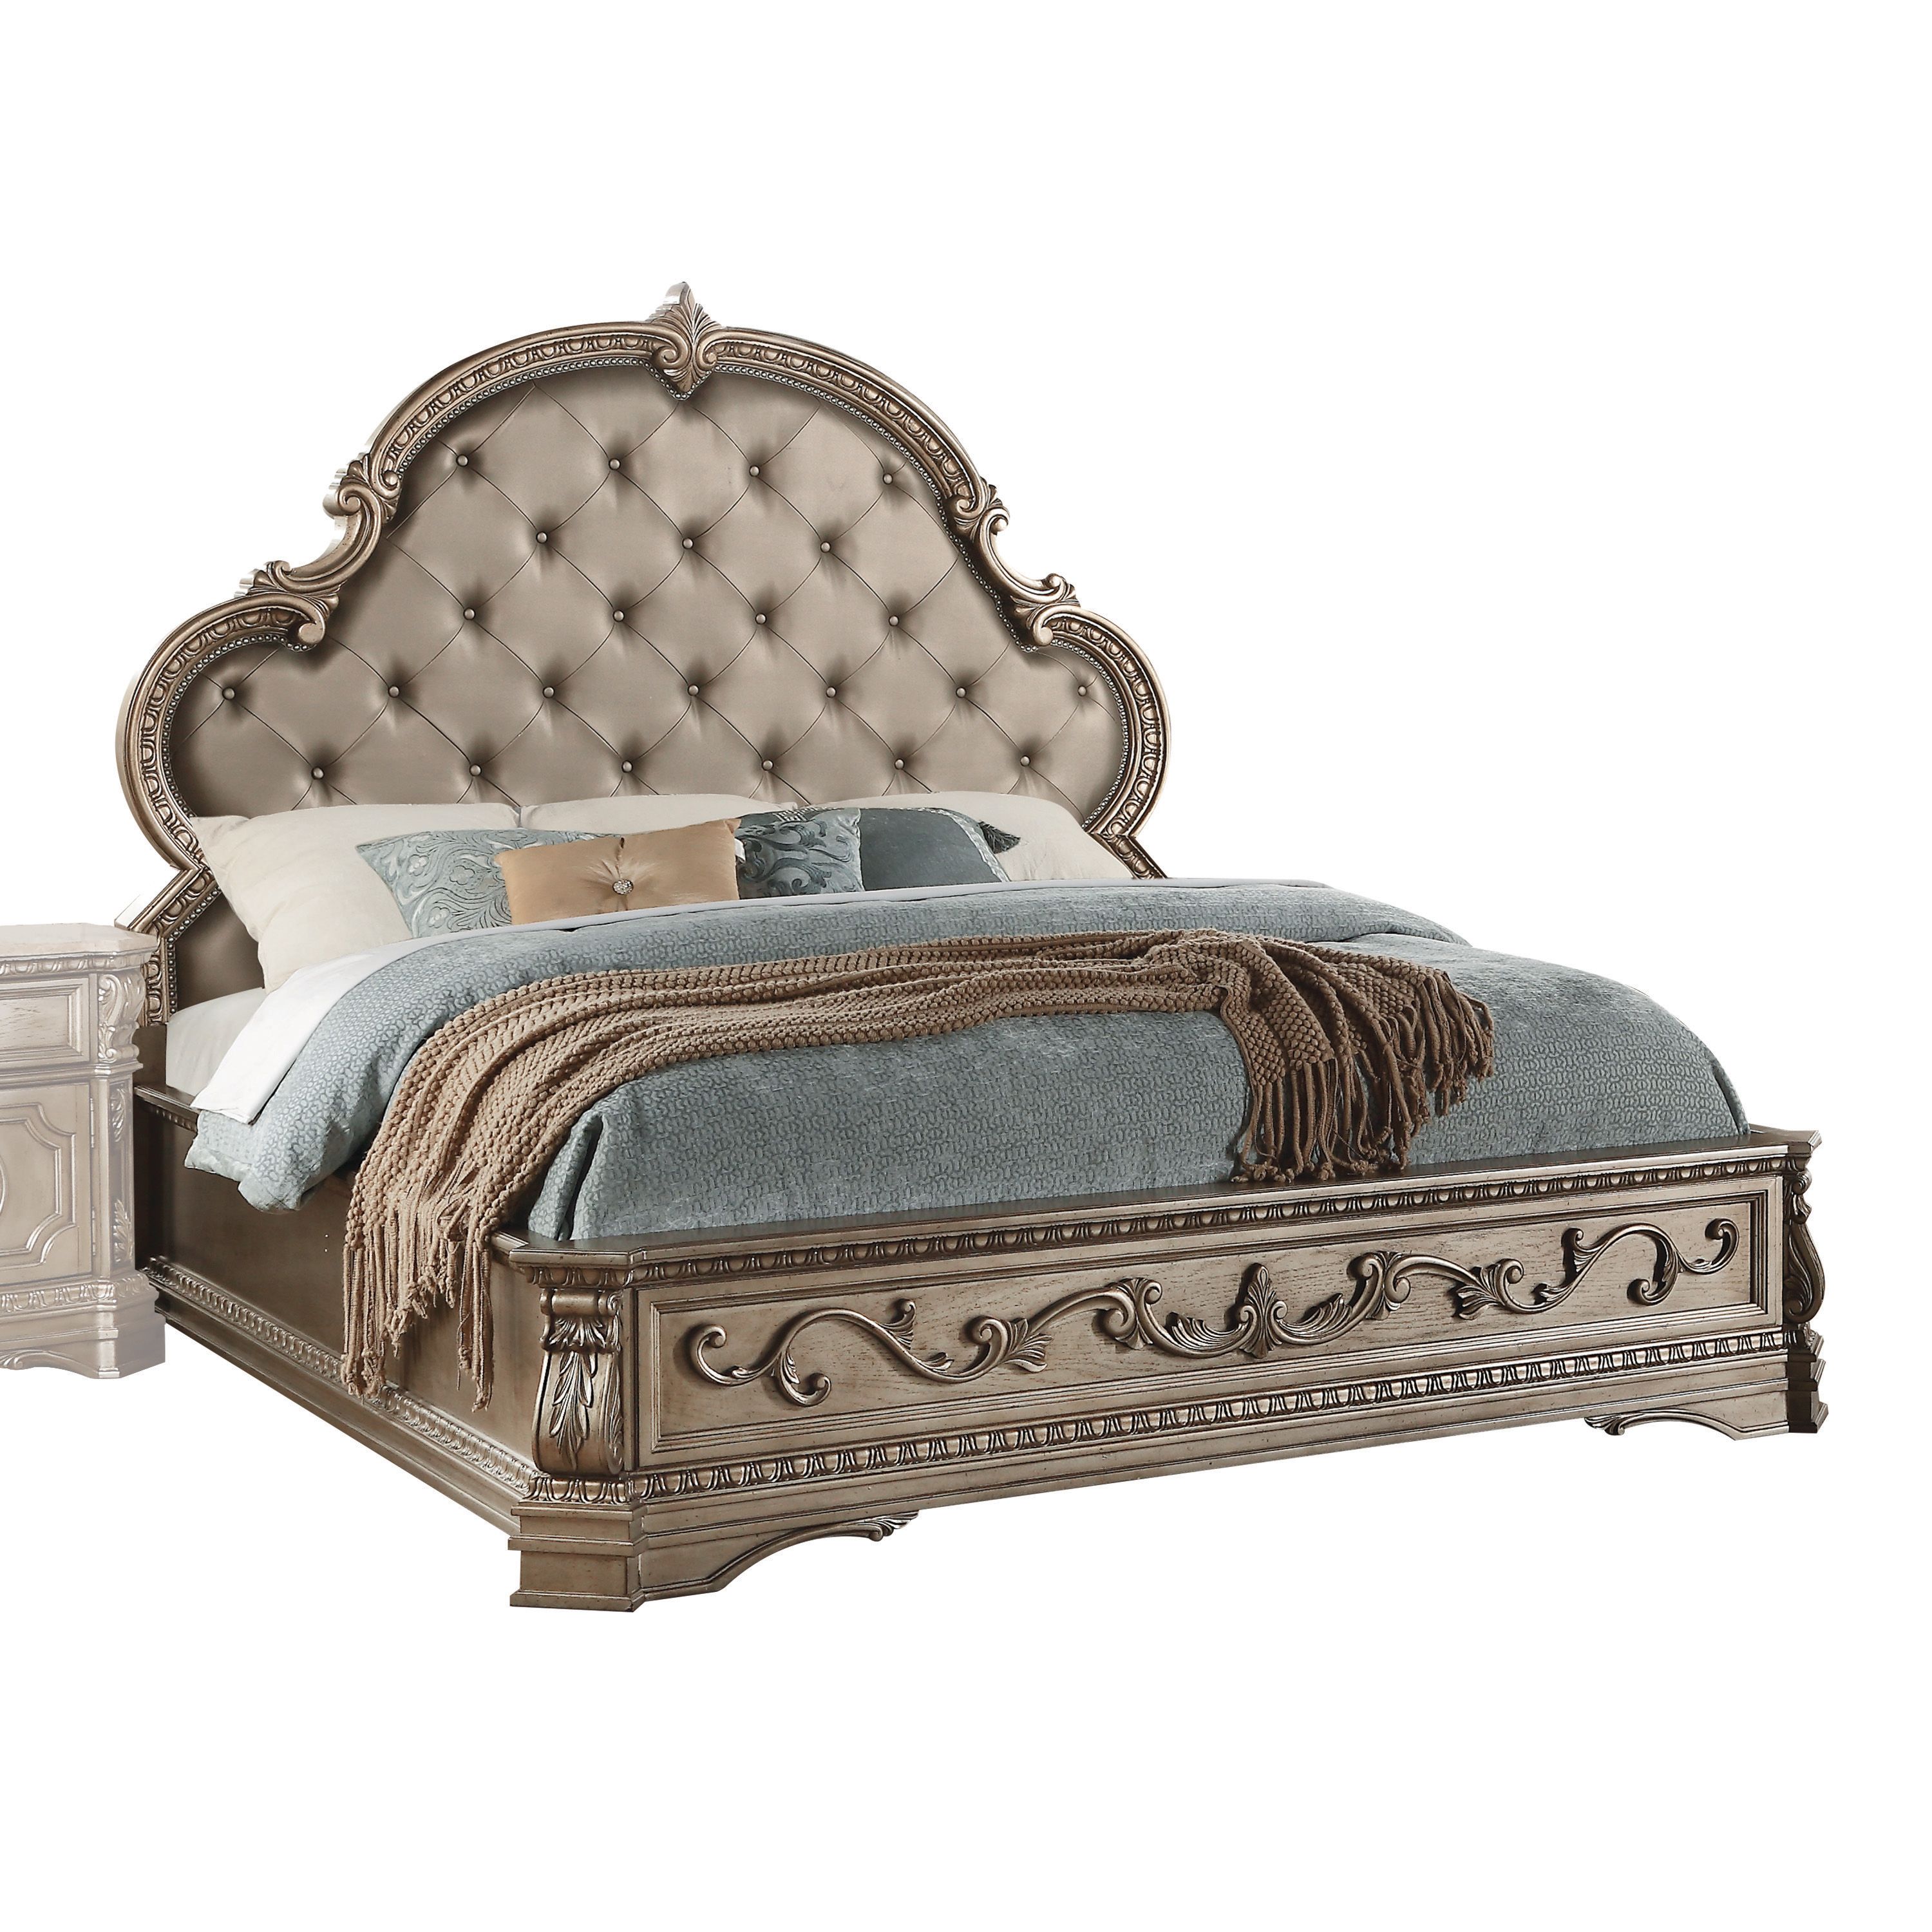 ACME Northville Bed in Antique Silver Finish, Multiple Sizes - image 2 of 2